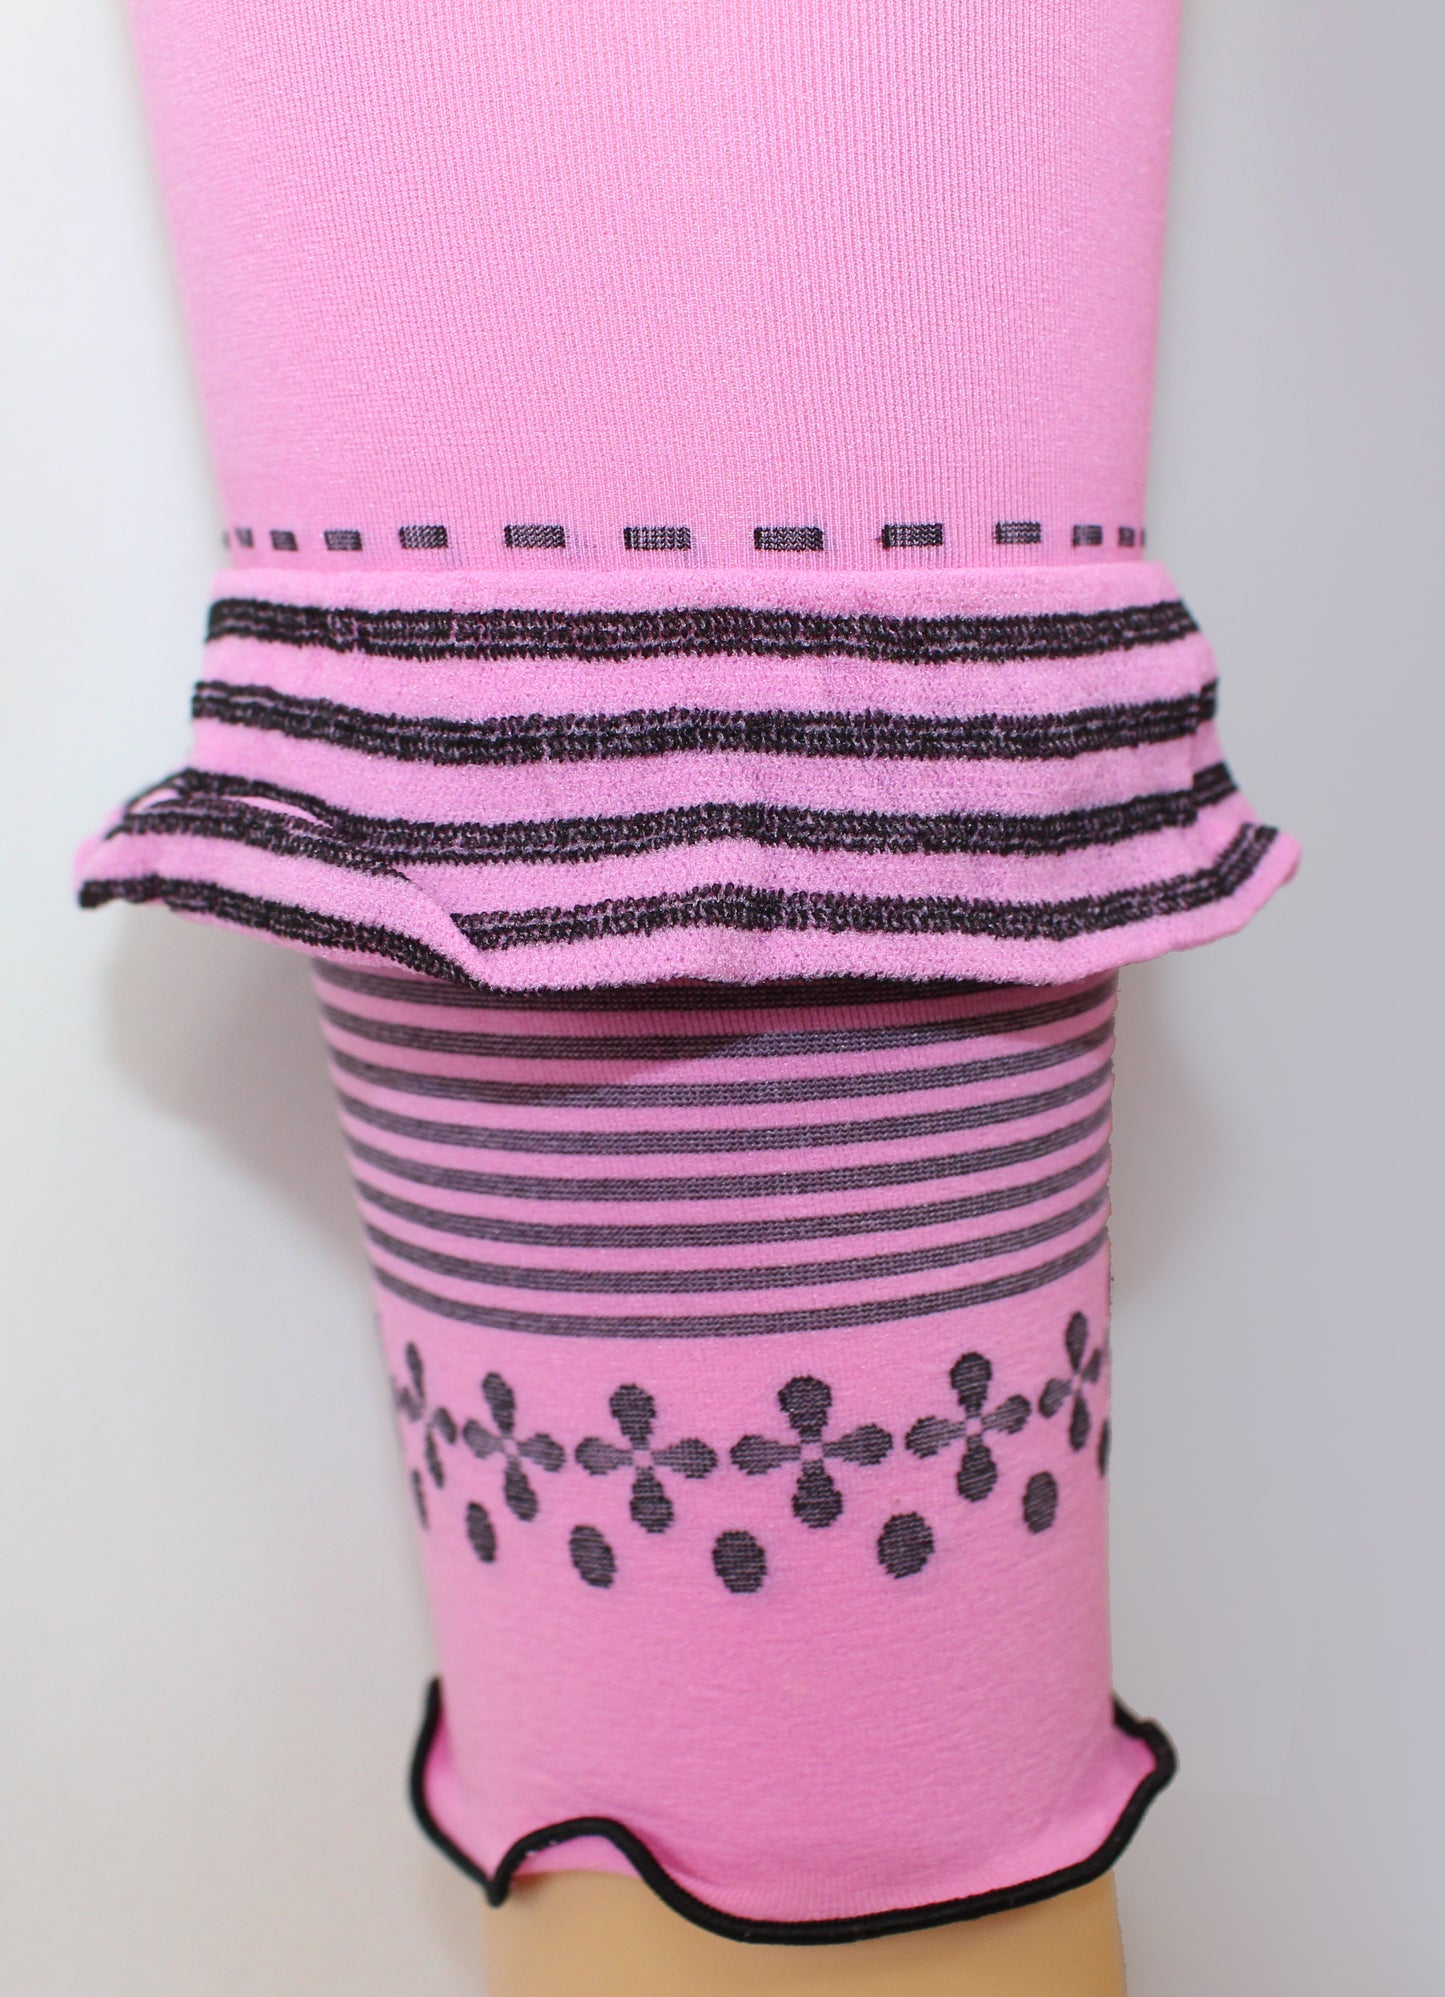 Omsa Outline Detail - Soft mauve pink opaque kid's footless tights leggings with a black horizontal striped ruched frill, striped and floral pattern edge.